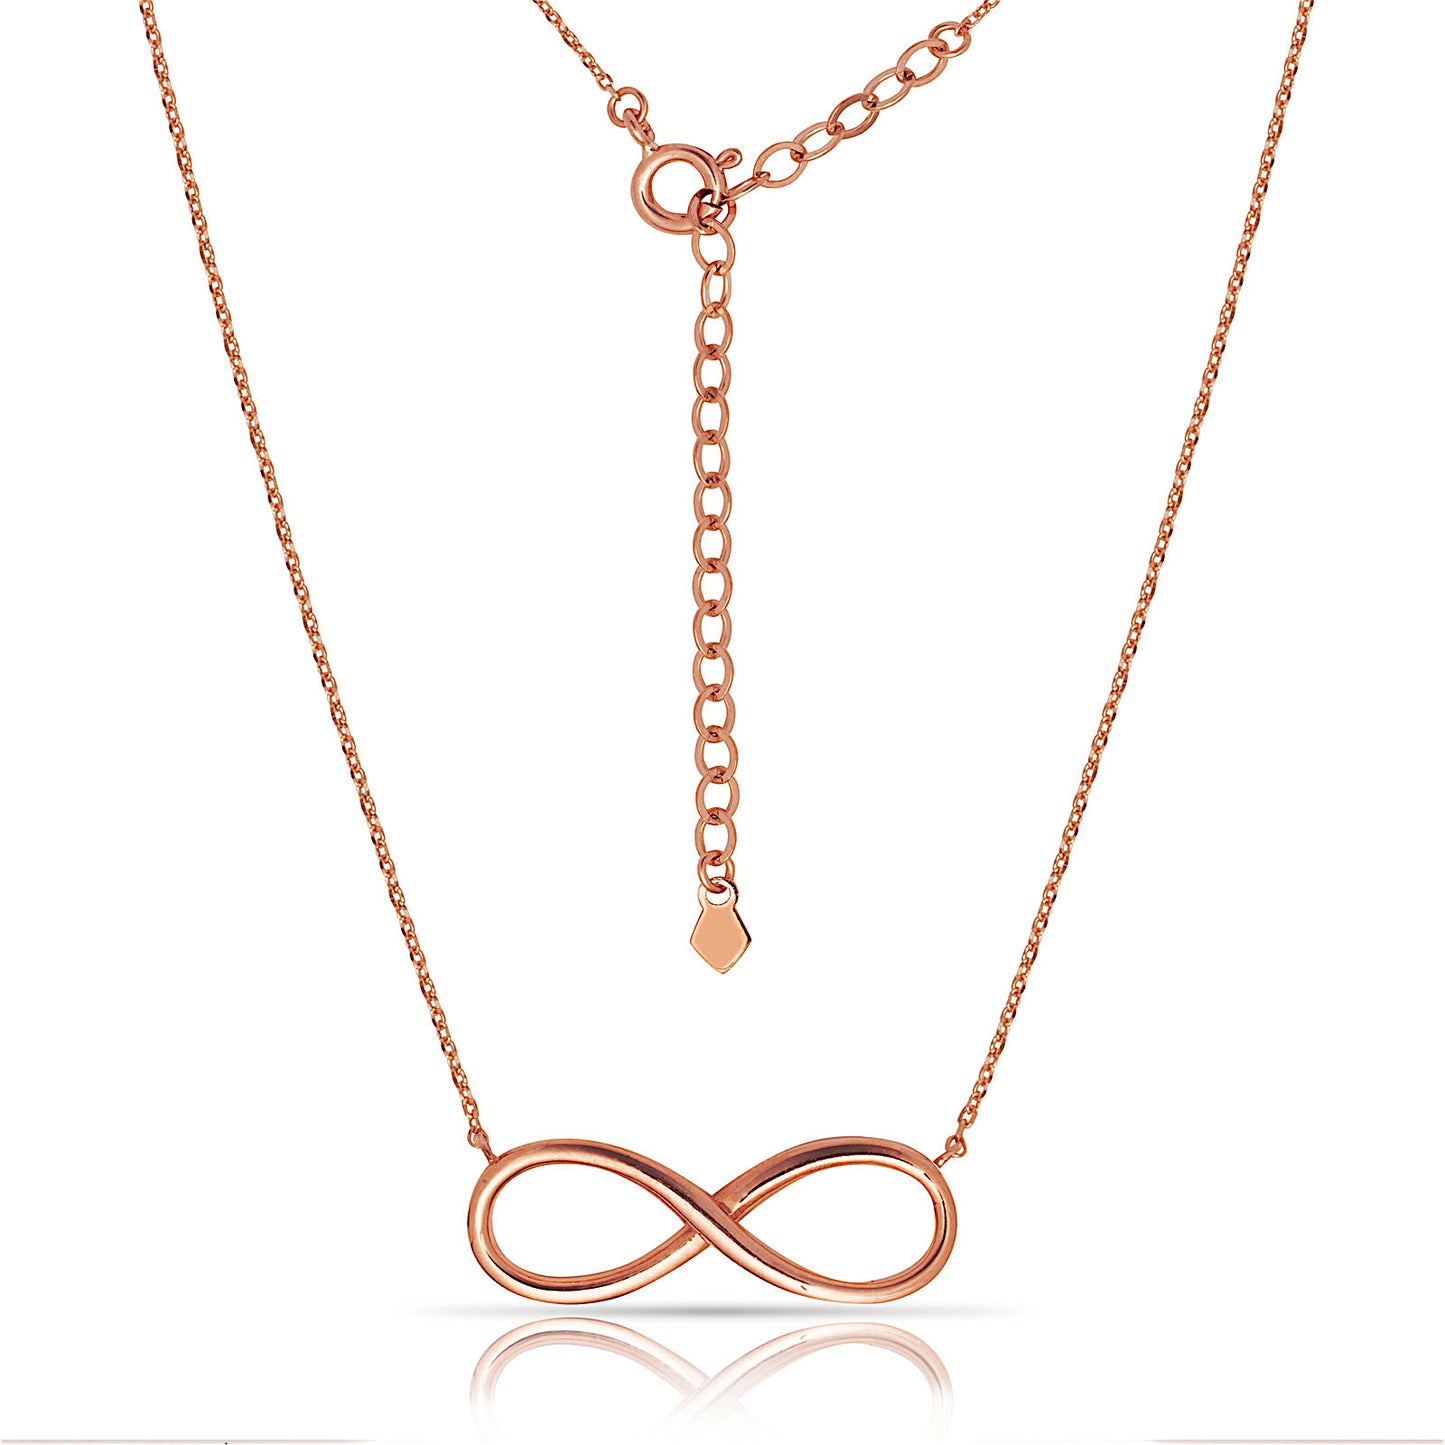 Minimalist 14K Solid Gold Infinity Necklace